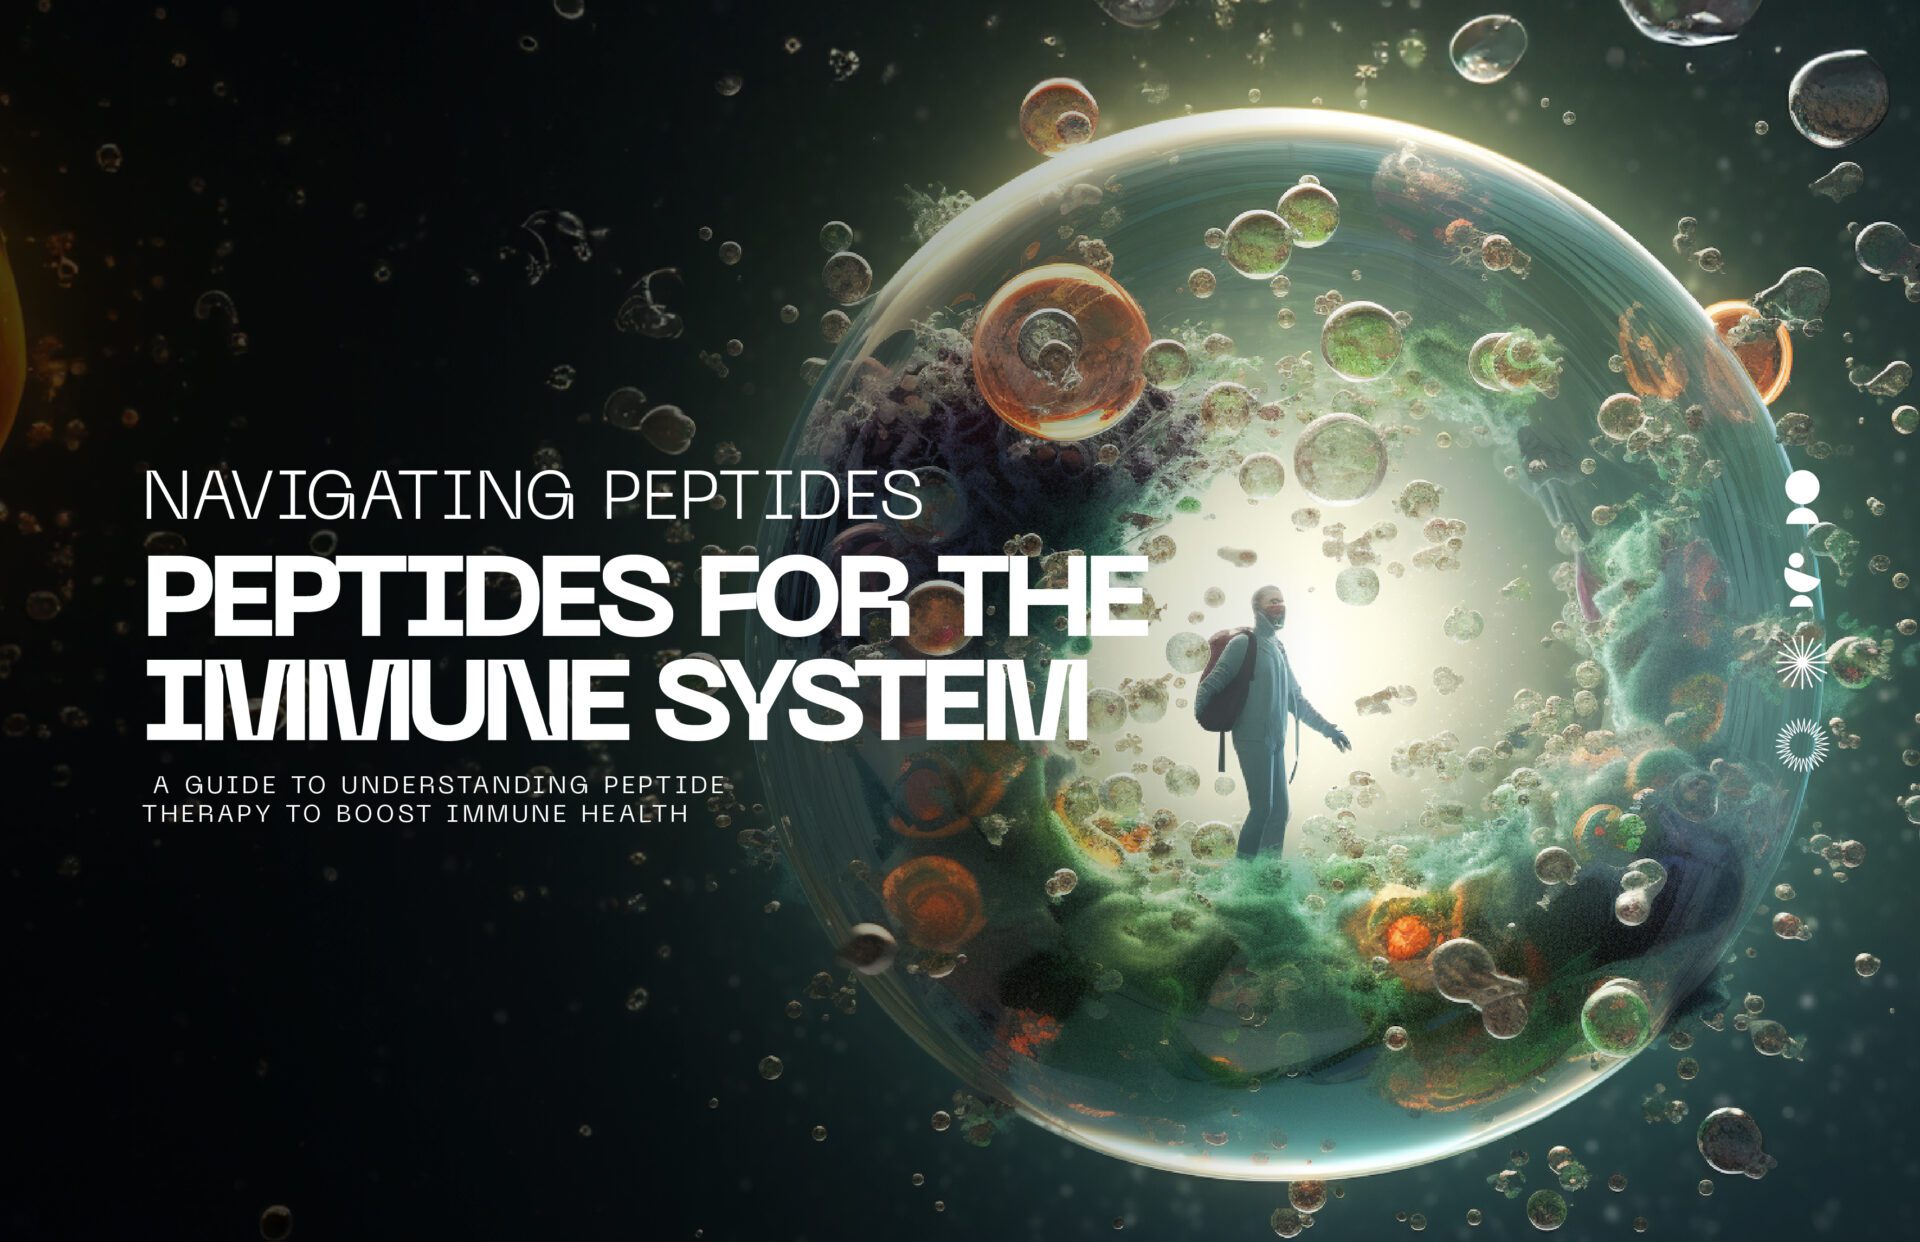 Peptides for the immune system. A guide to understanding peptide therapy to boost immune health